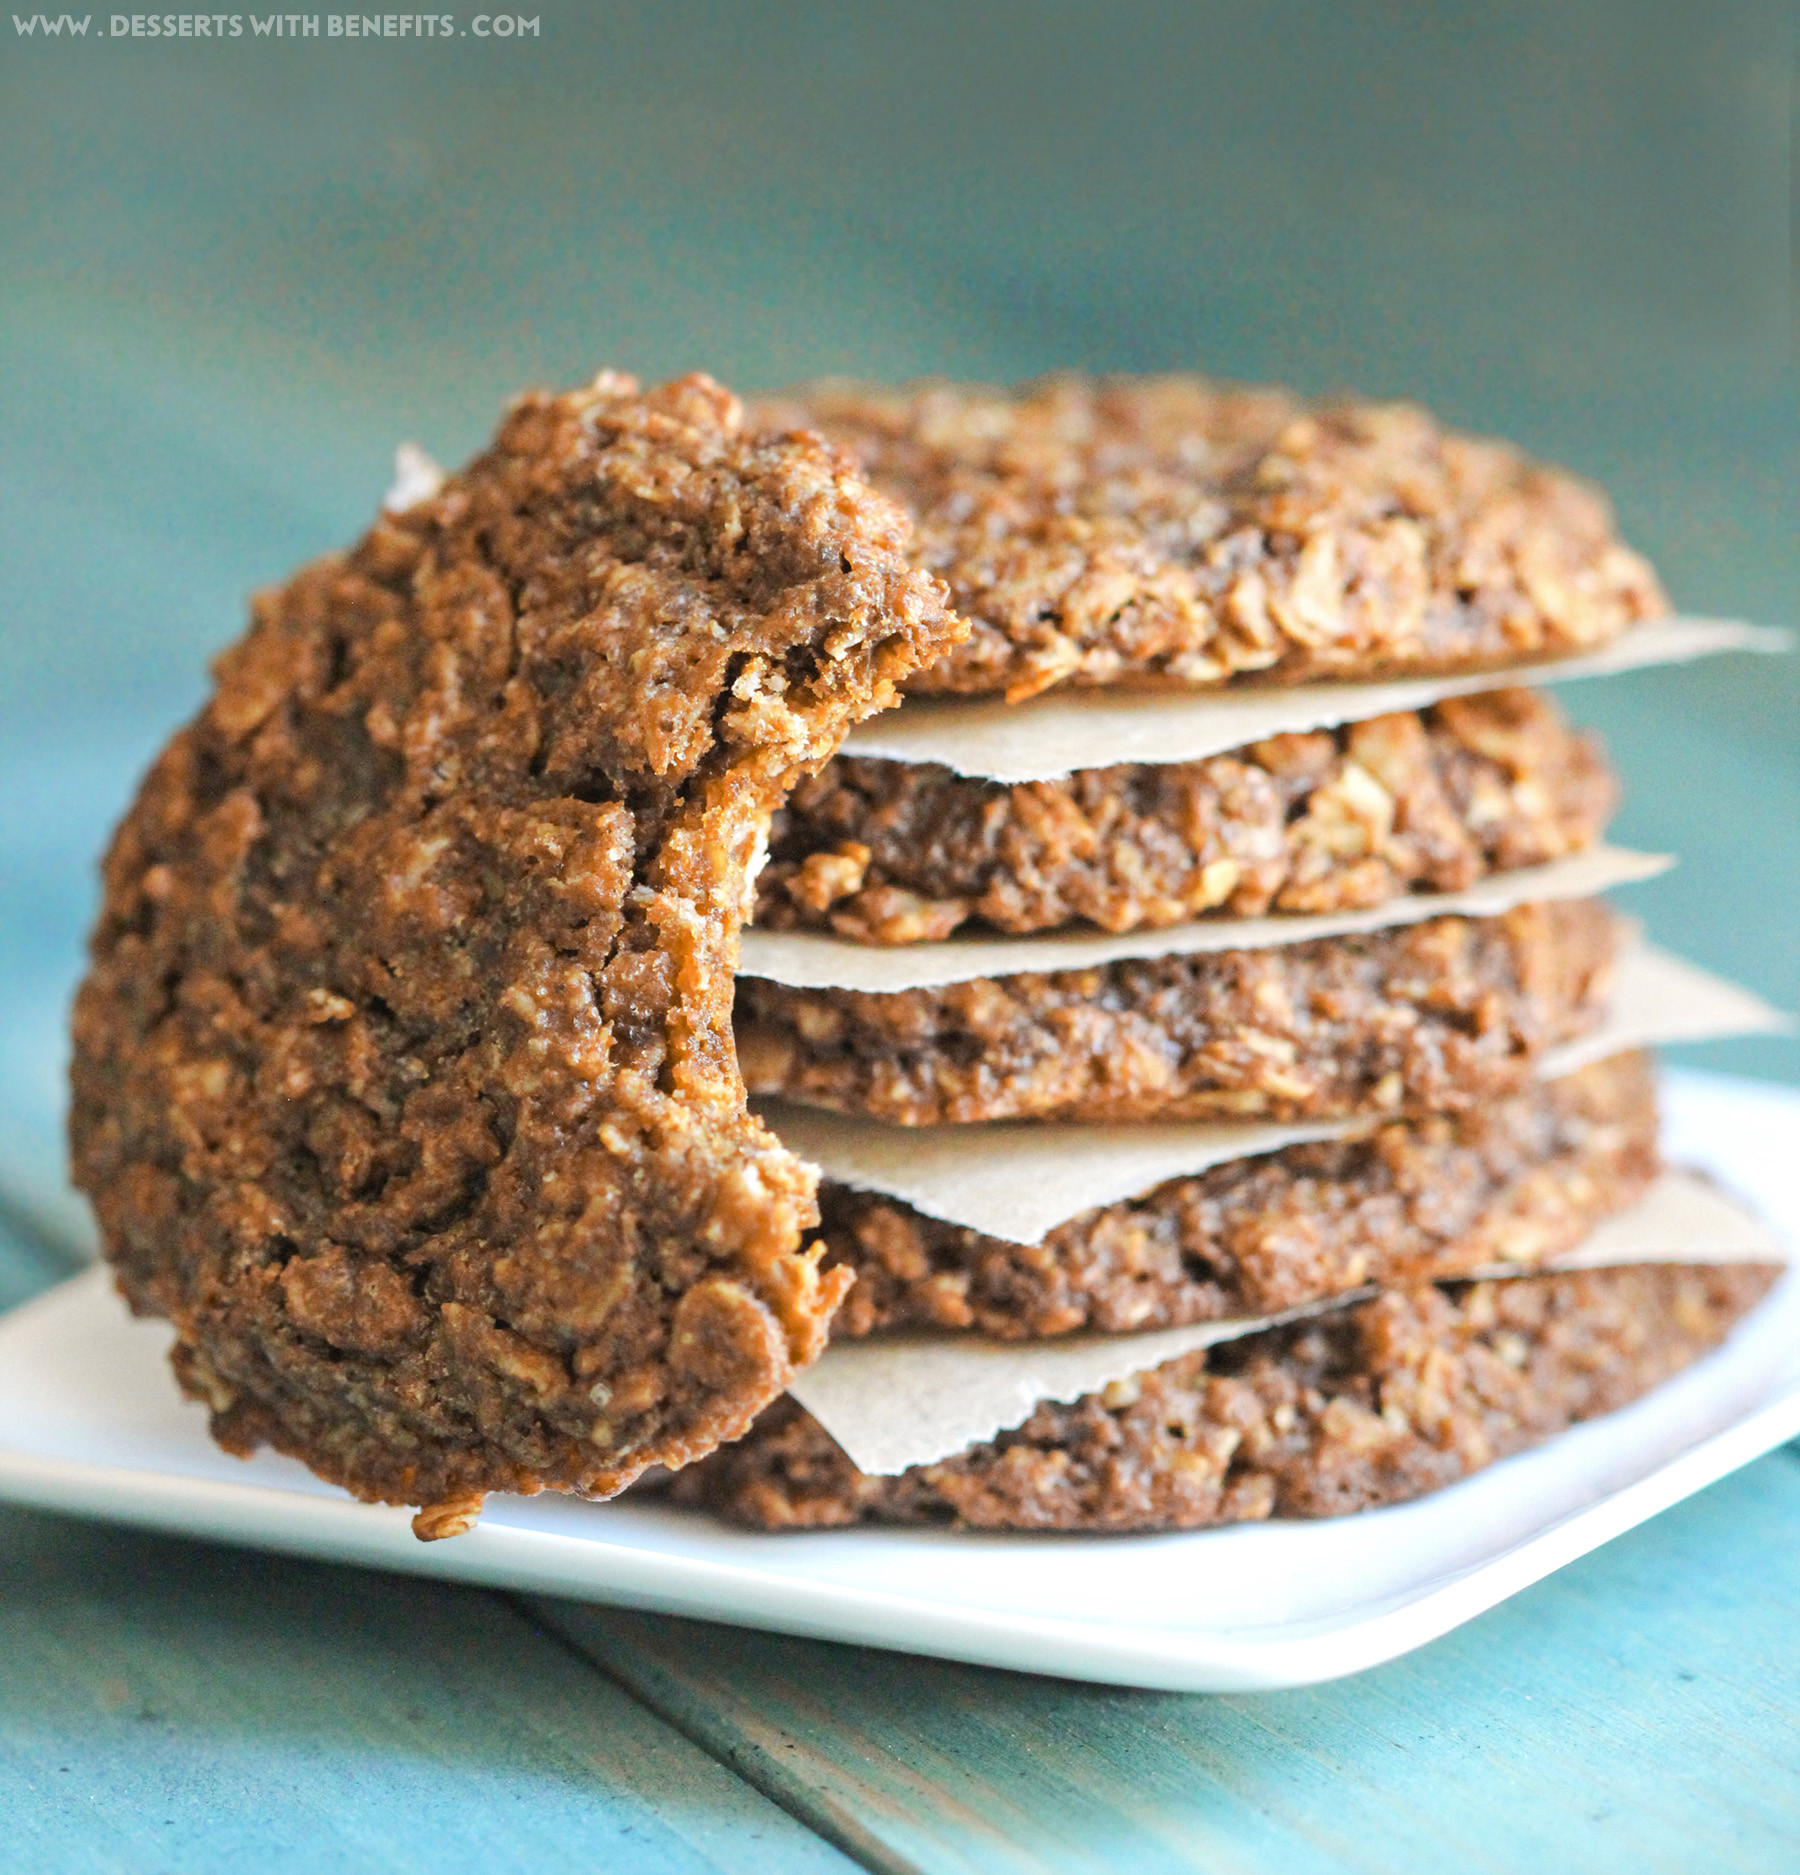 Healthy Chewy Oatmeal Cookies
 Healthy Chewy Peanut Butter Oatmeal Cookies recipe gluten